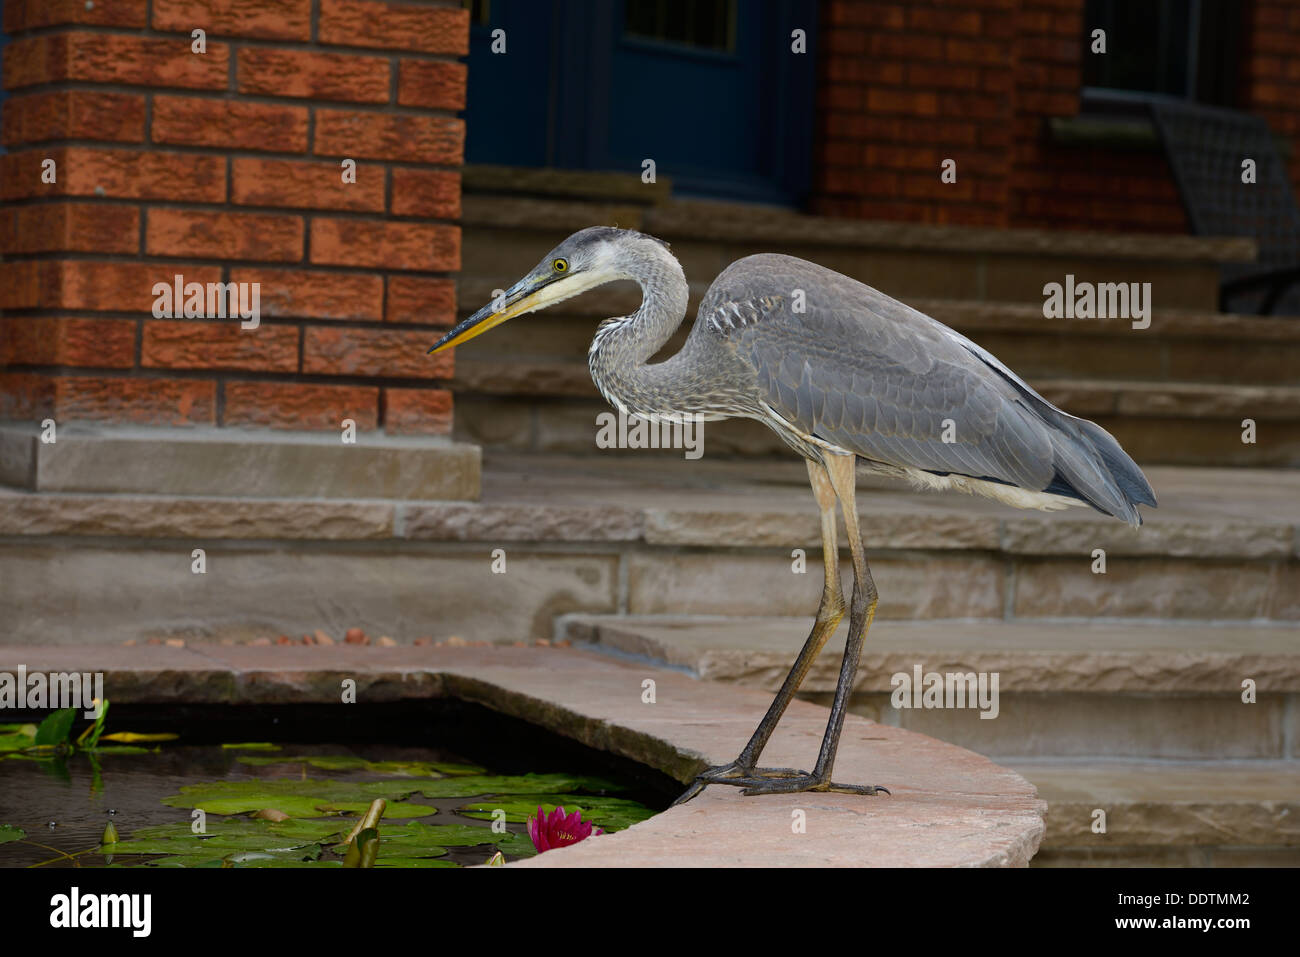 Wild Great Blue Heron invading a decorative fish pond at the front door of a house in Toronto Canada Stock Photo